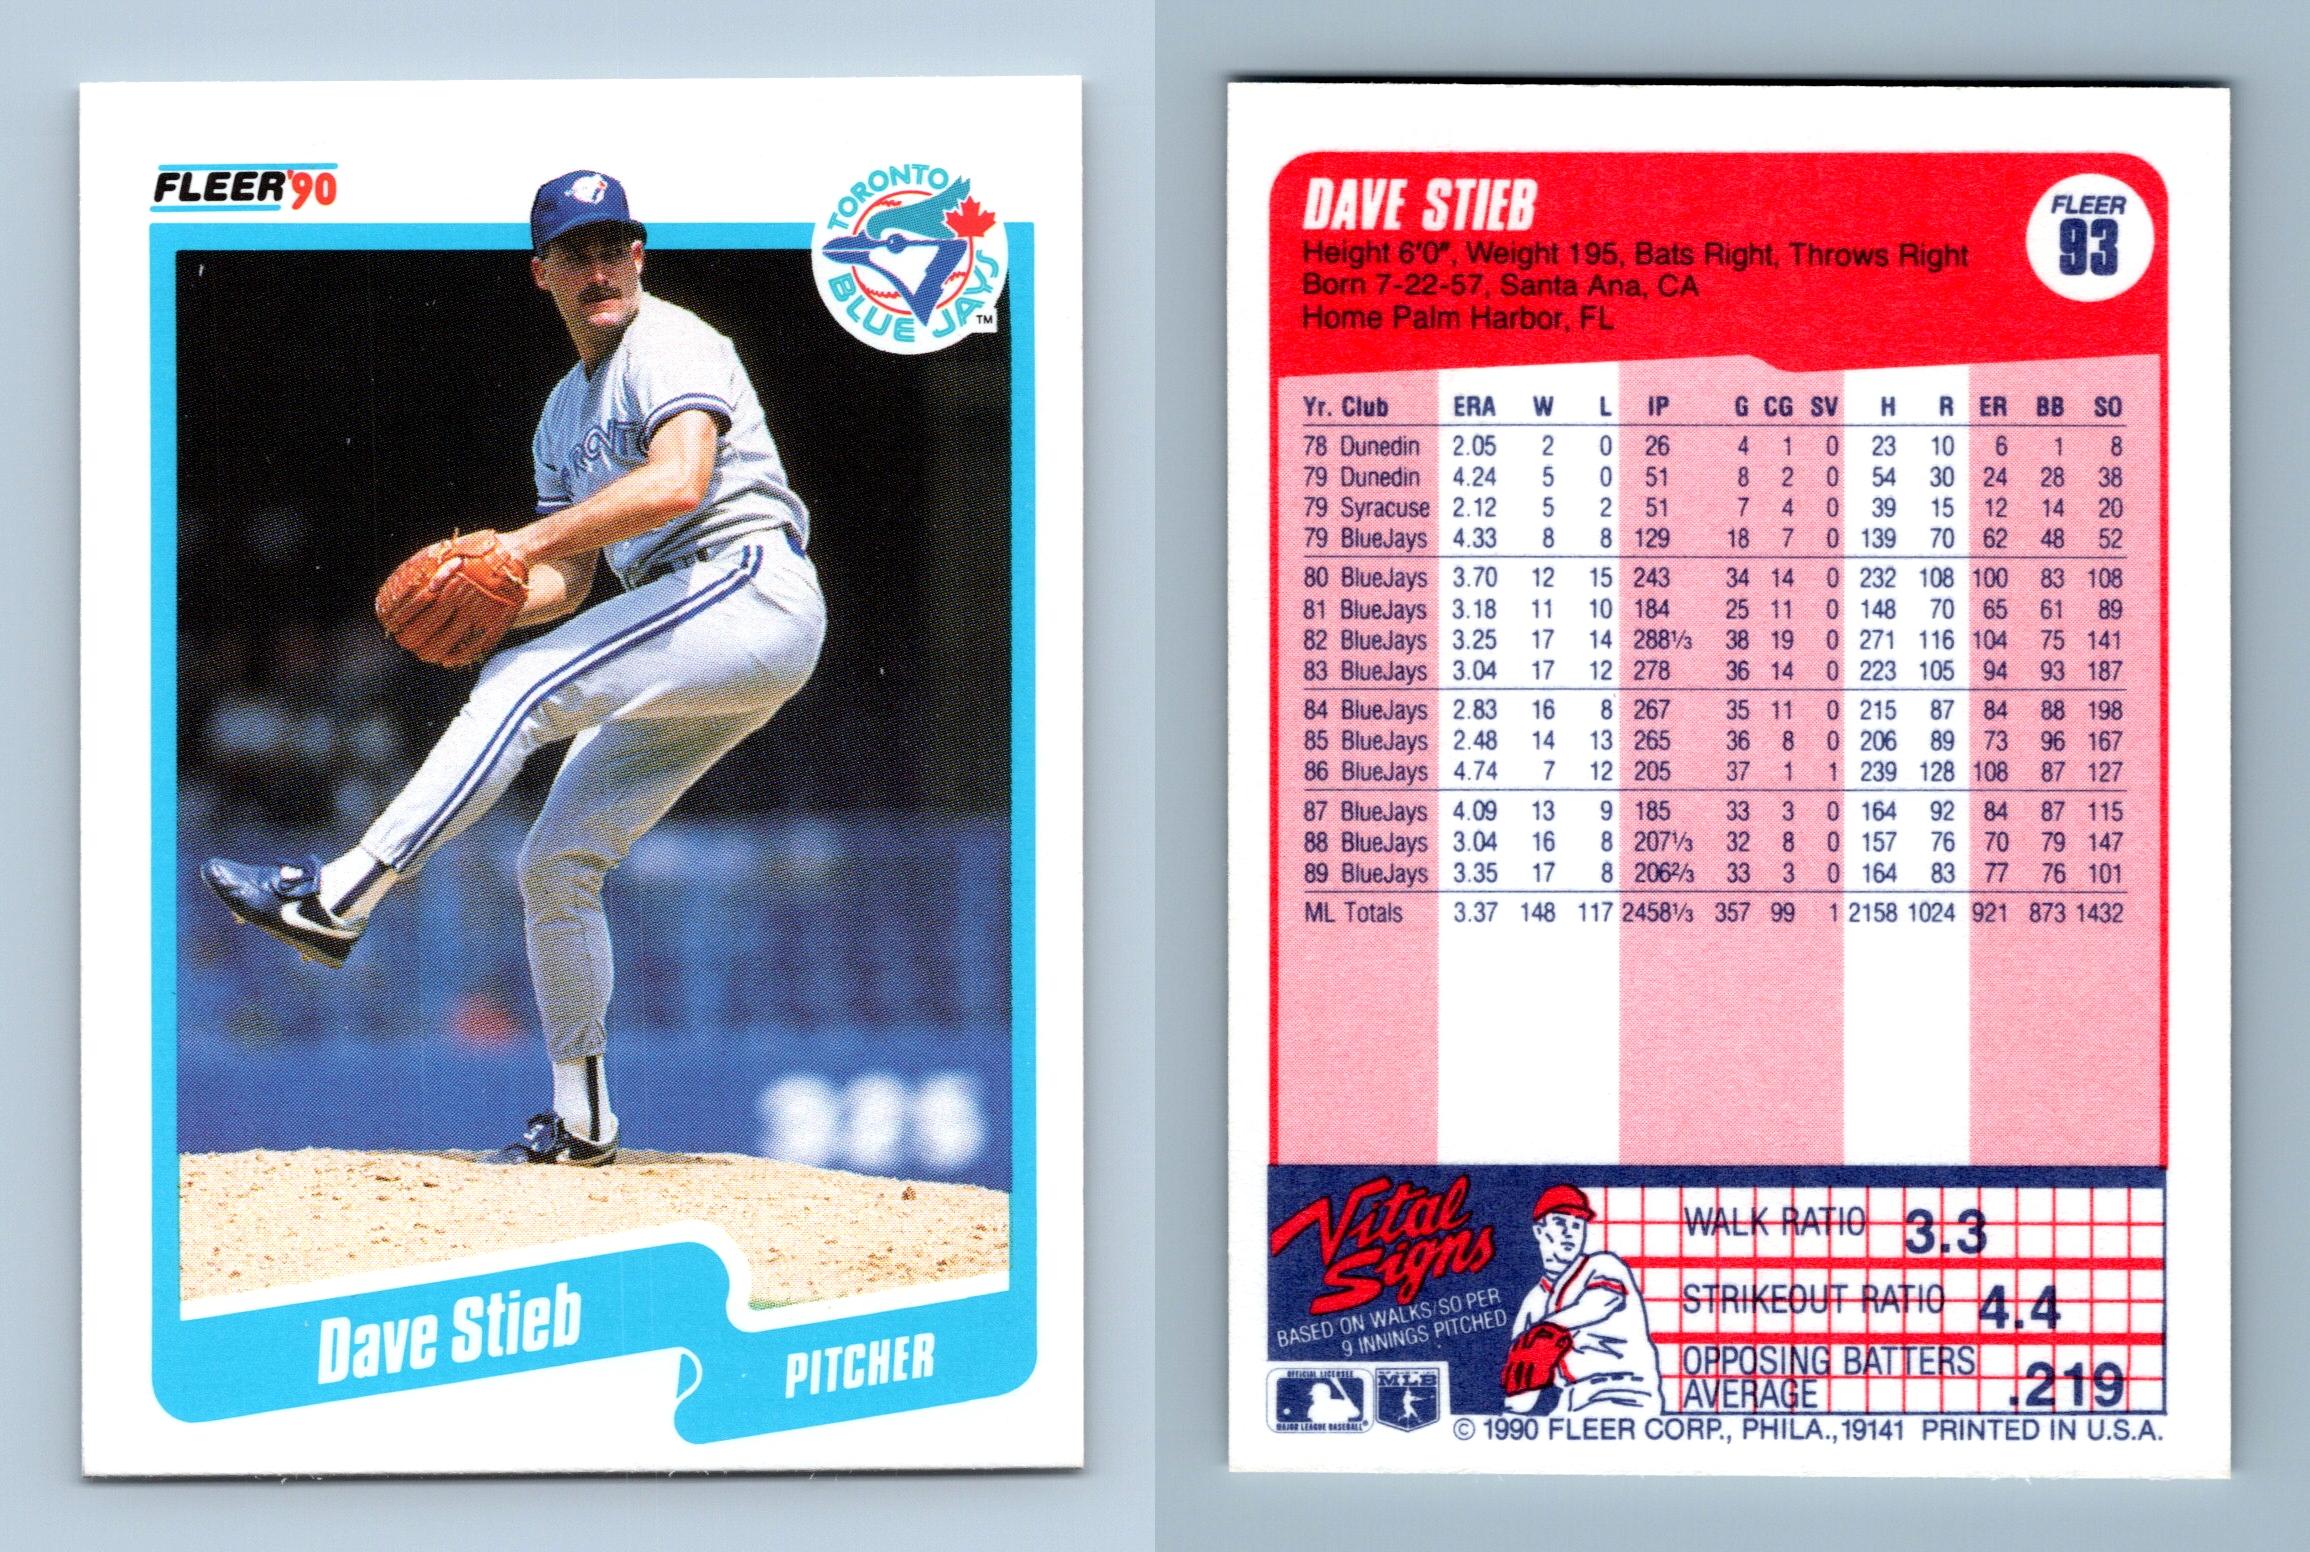 Dave Stieb Ace Toronto Blue Jays Poster - Victory Productions 1990